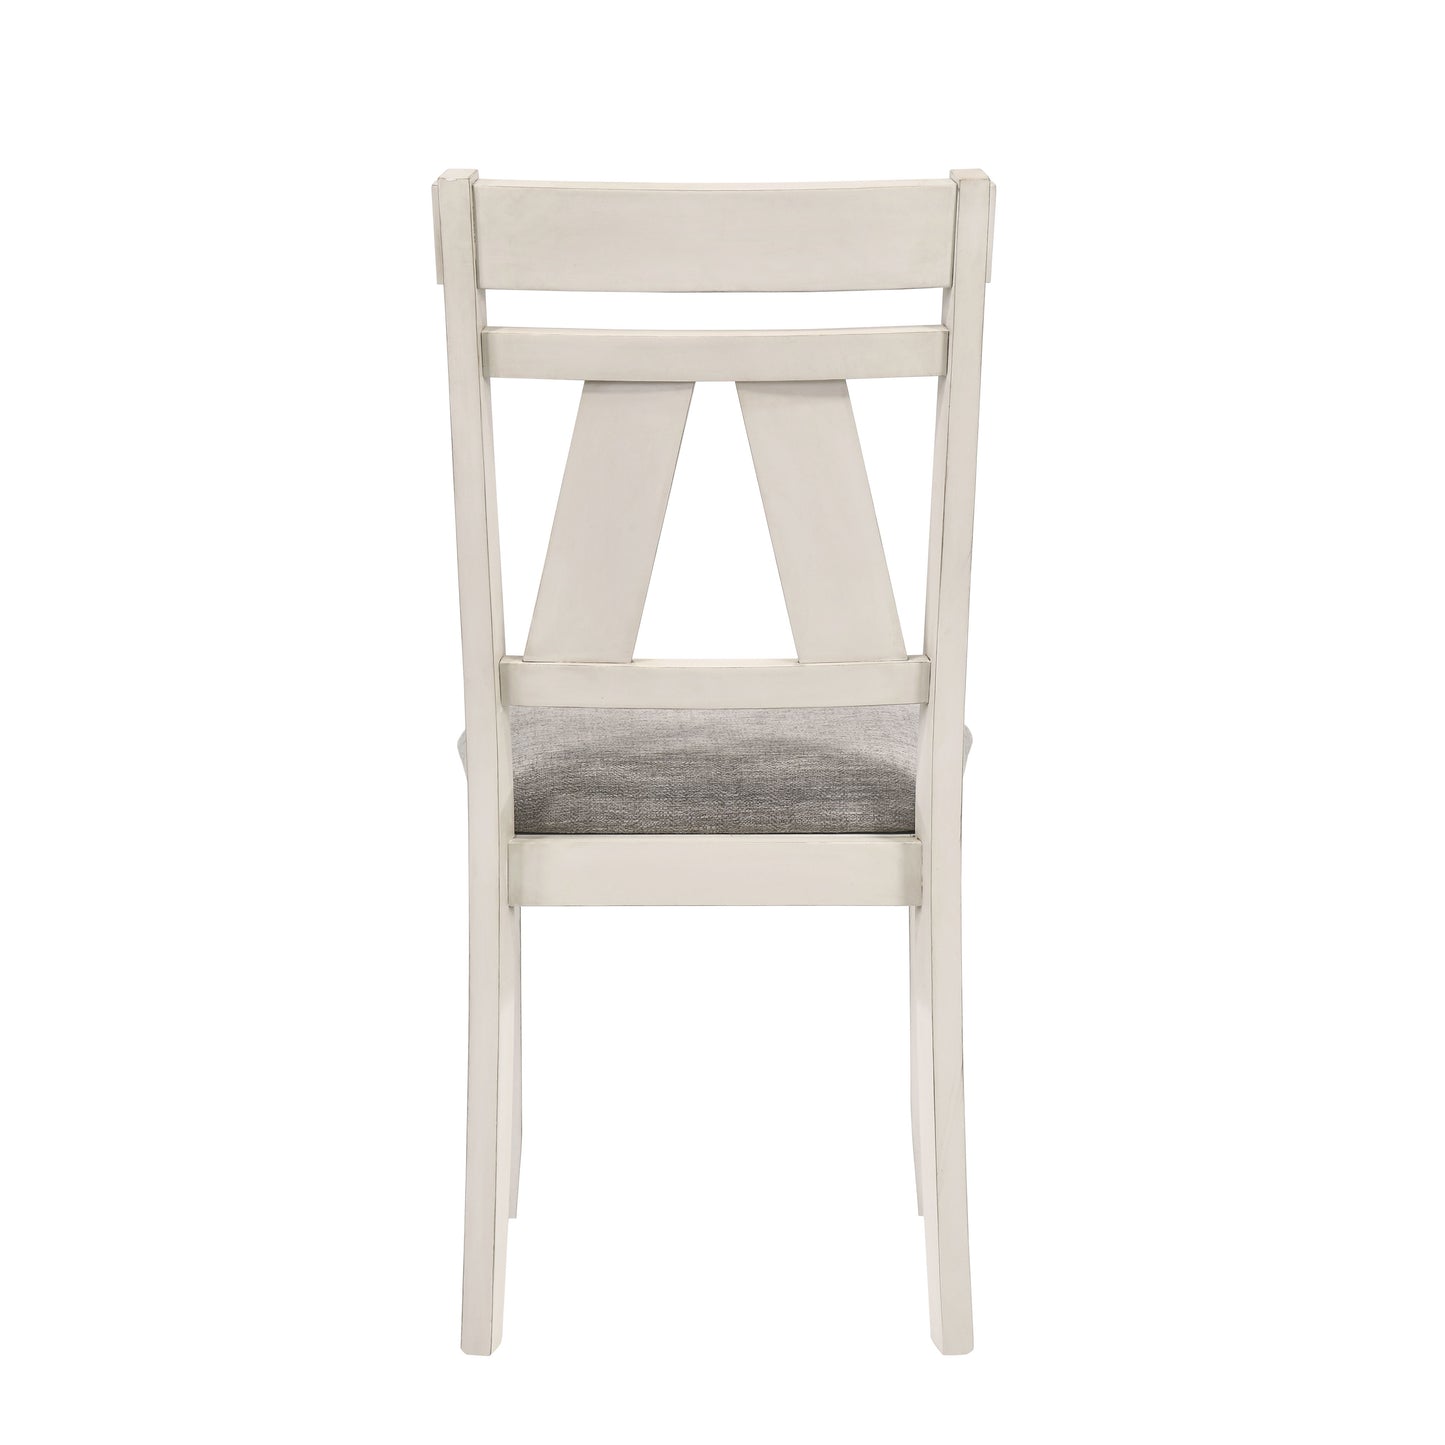 Maisie - Side Chair (Set of 2) - White